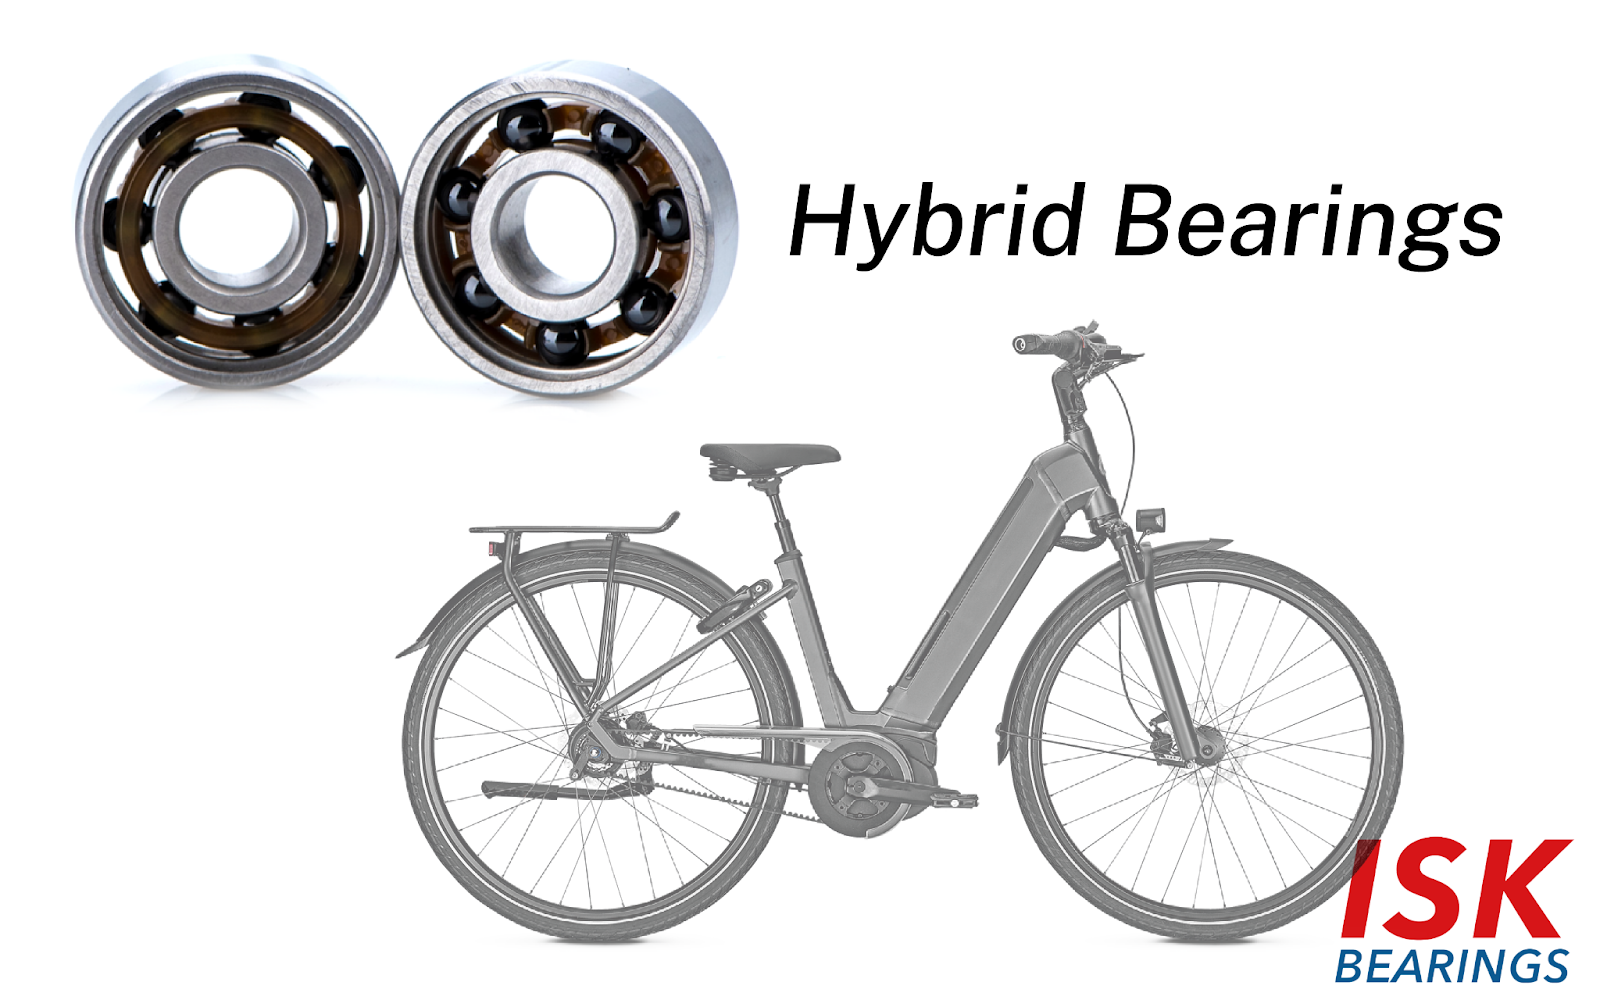 Hybrid Bearings for bicycles